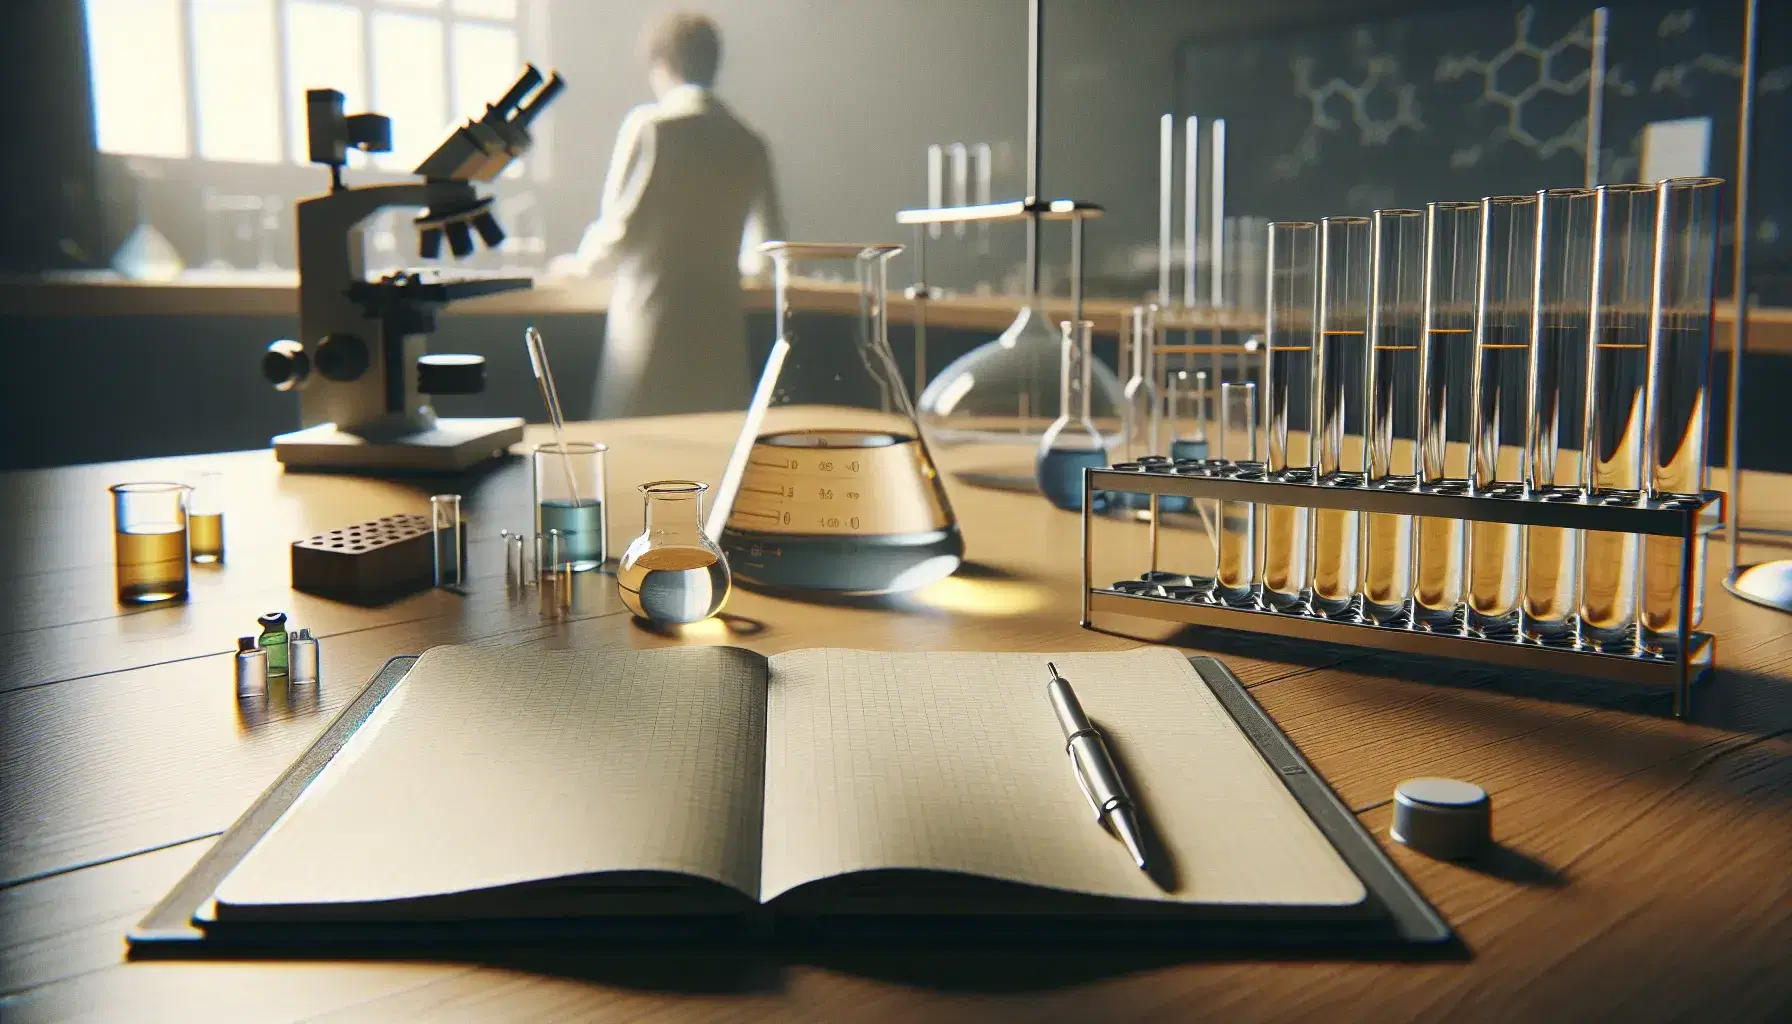 Laboratory scene with a notebook, beaker with transparent liquid, test tubes in a rack, and a scientist examining a microscope in the background.